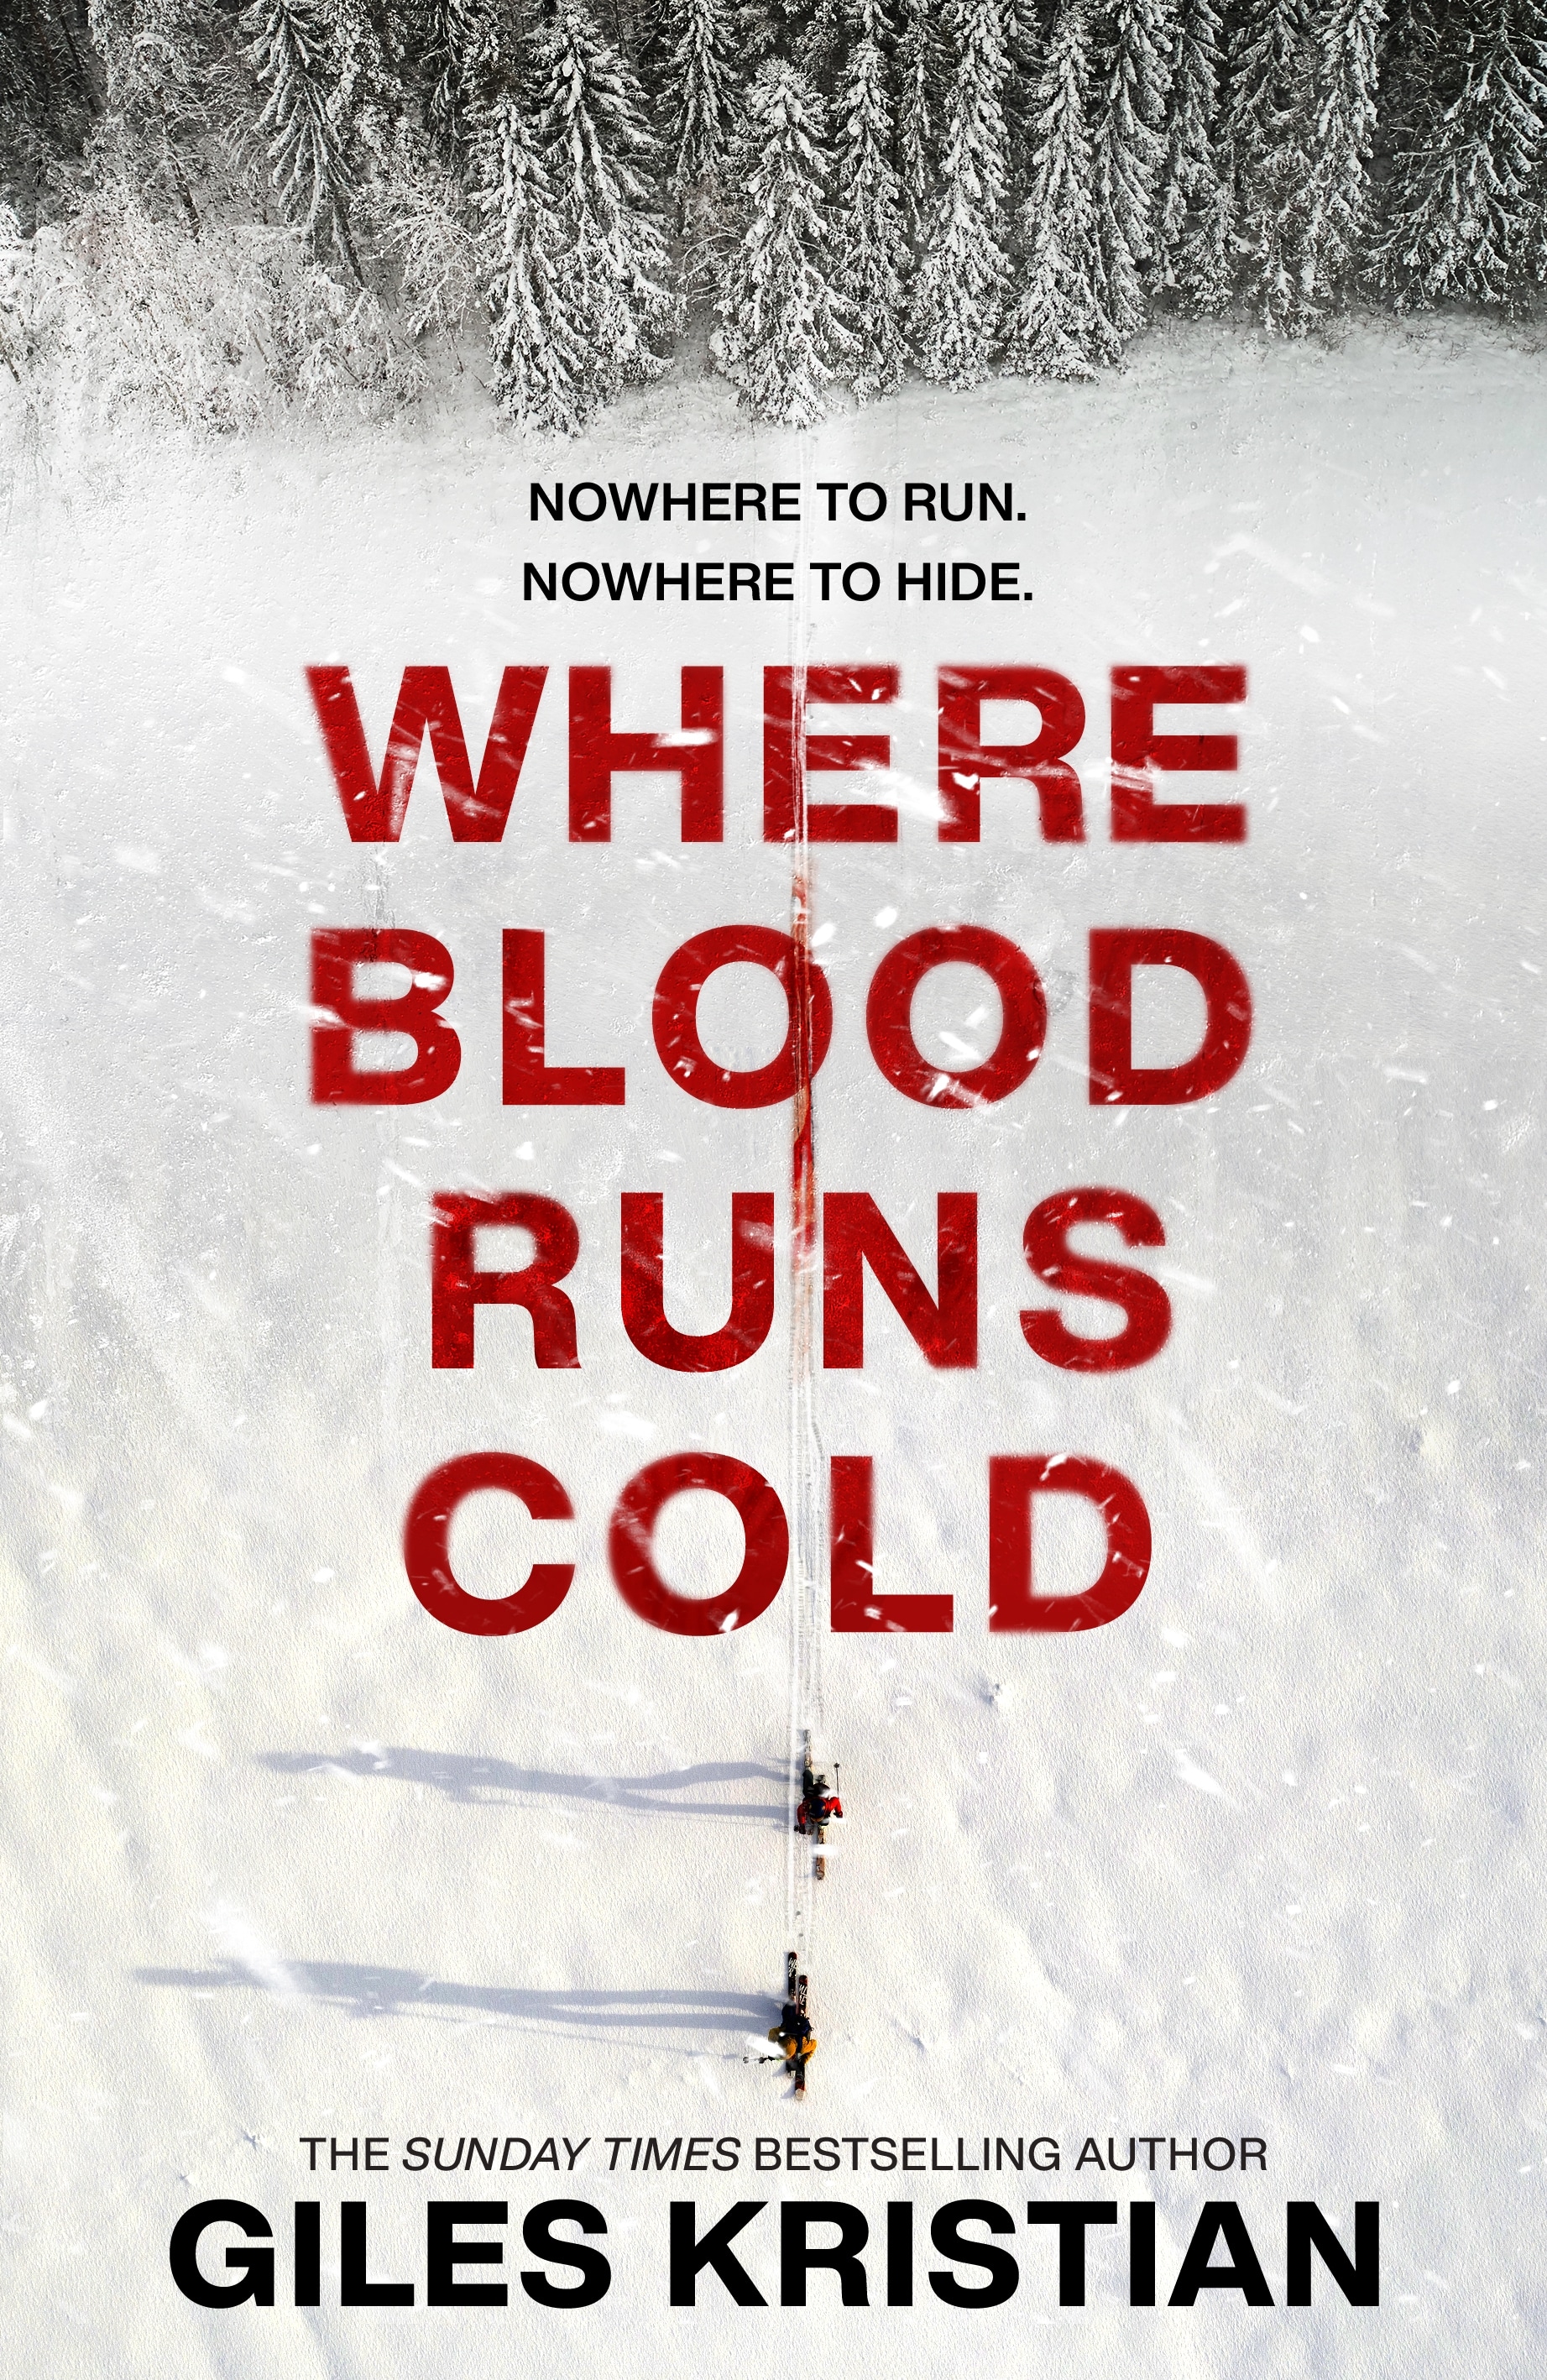 Book “Where Blood Runs Cold” by Giles Kristian — February 24, 2022